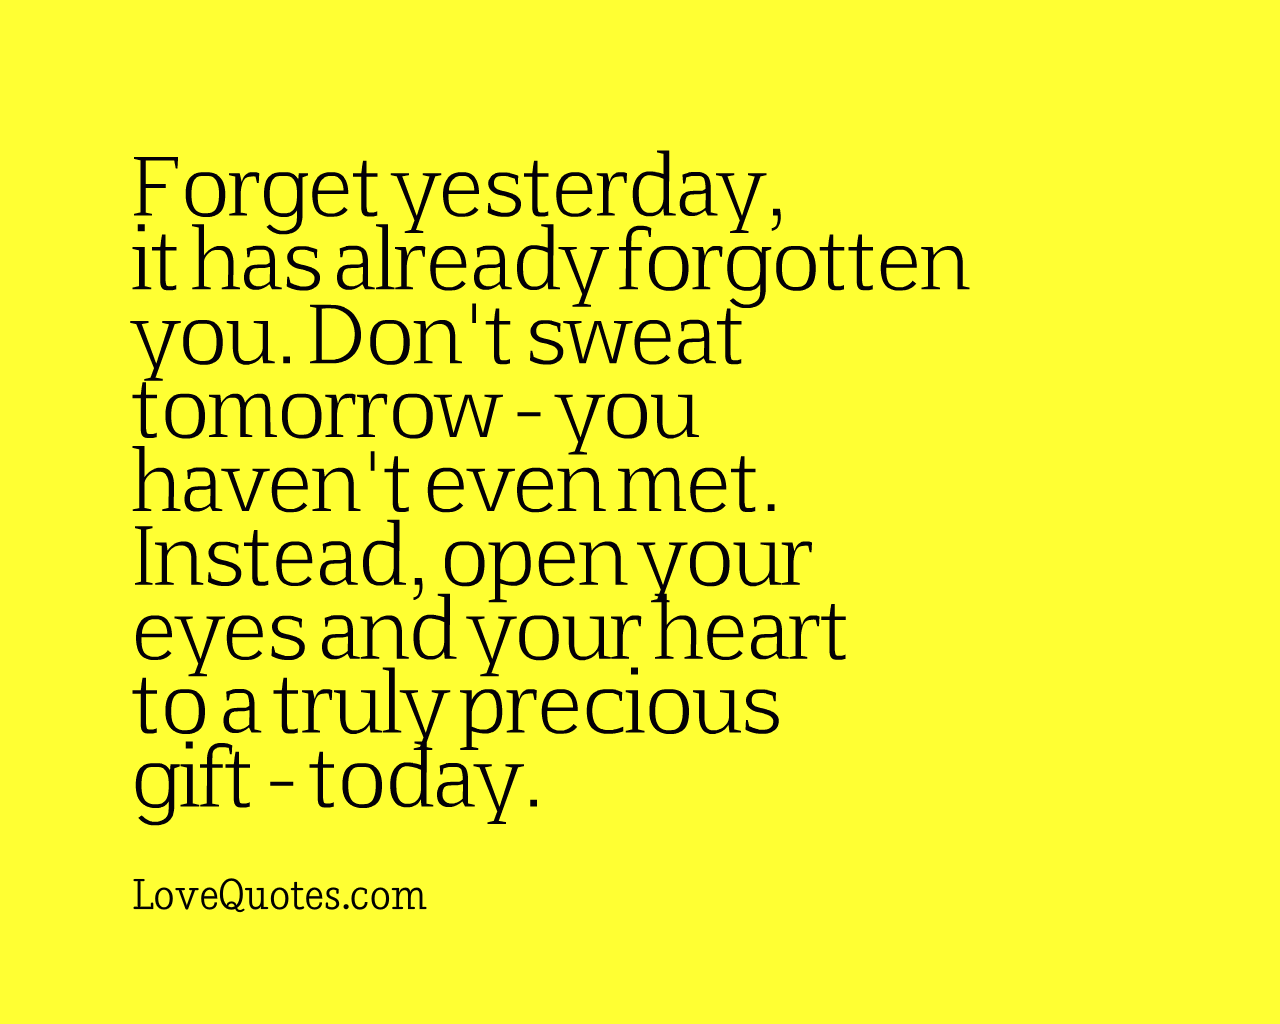 Forget Yesterday